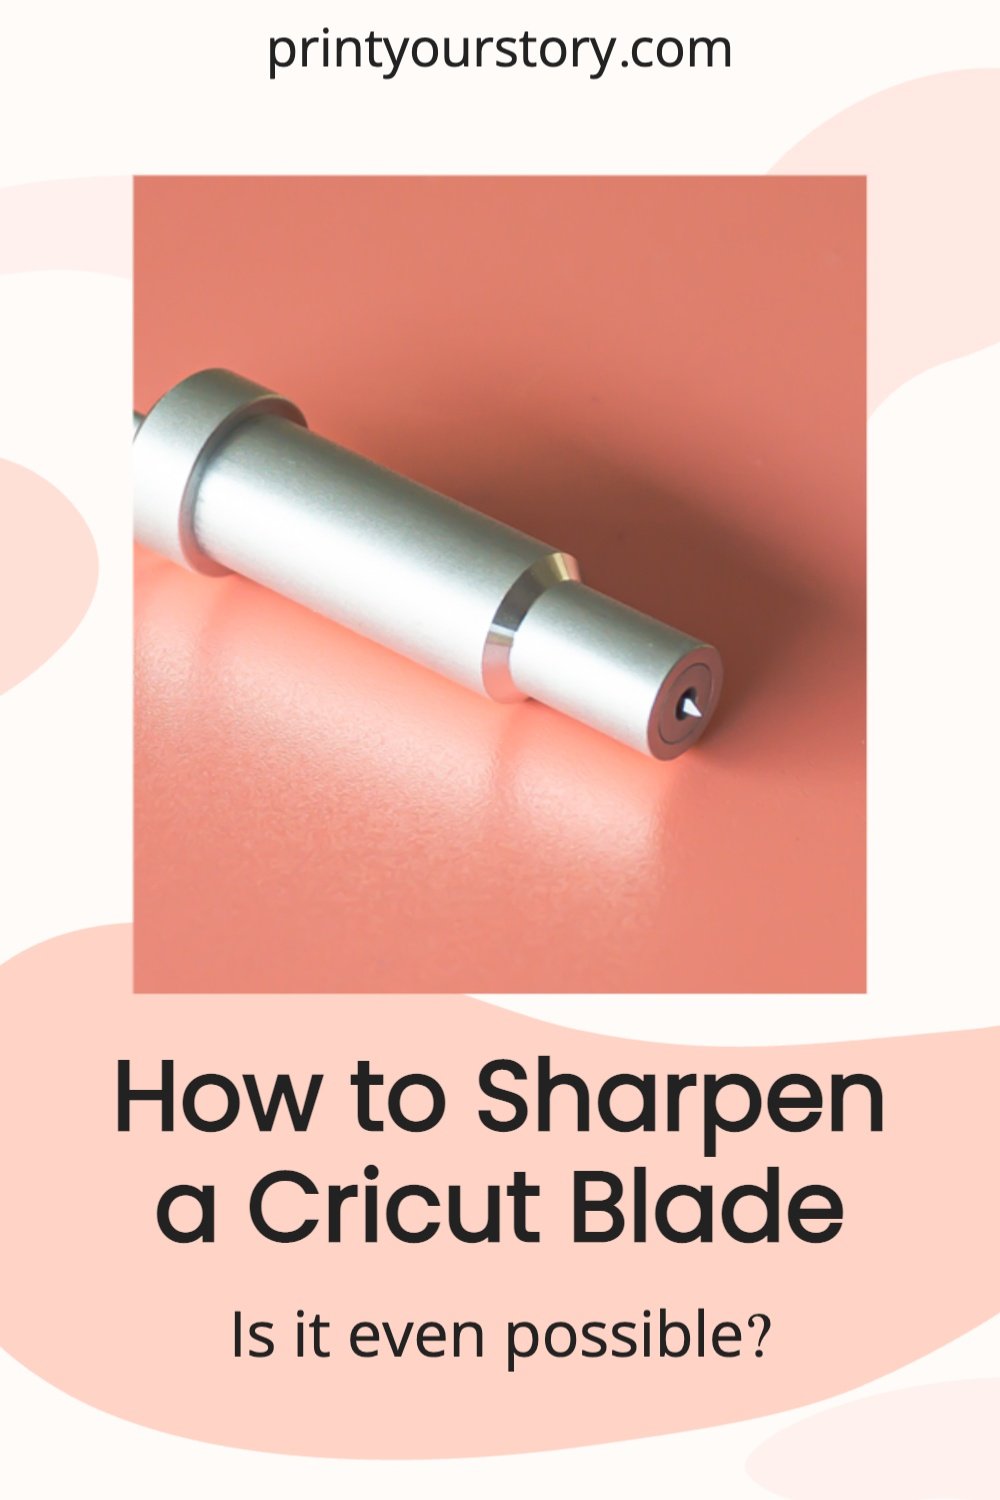 Can You Sharpen a Cricut Blade? (Is It Even Possible?)